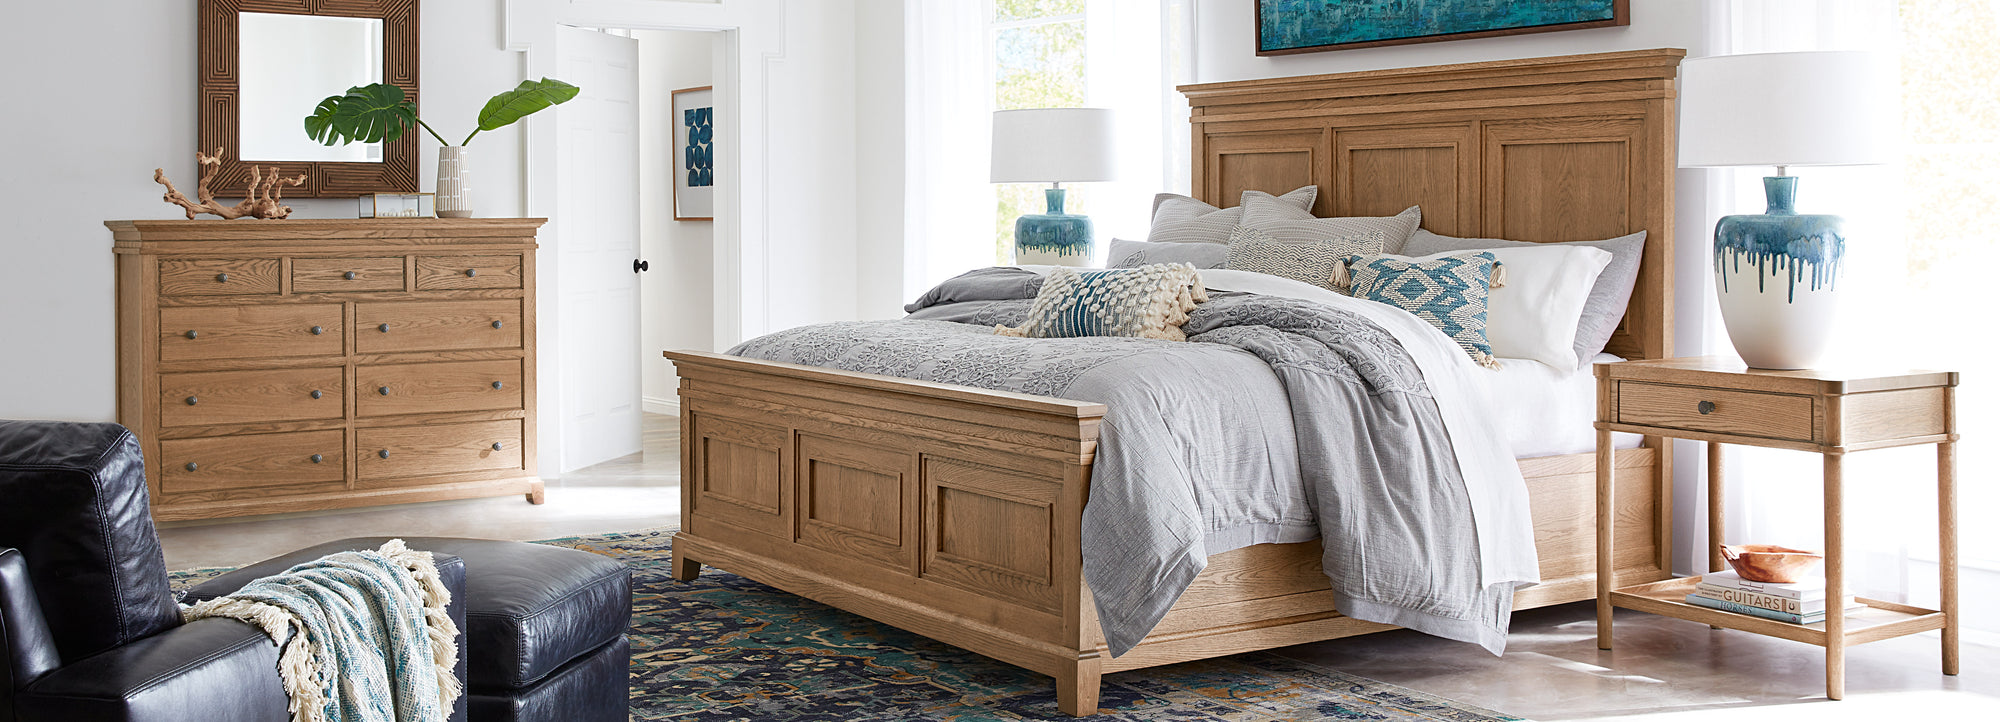 Stickley St. Lawrence collection bed frame, nightstand, and dresser